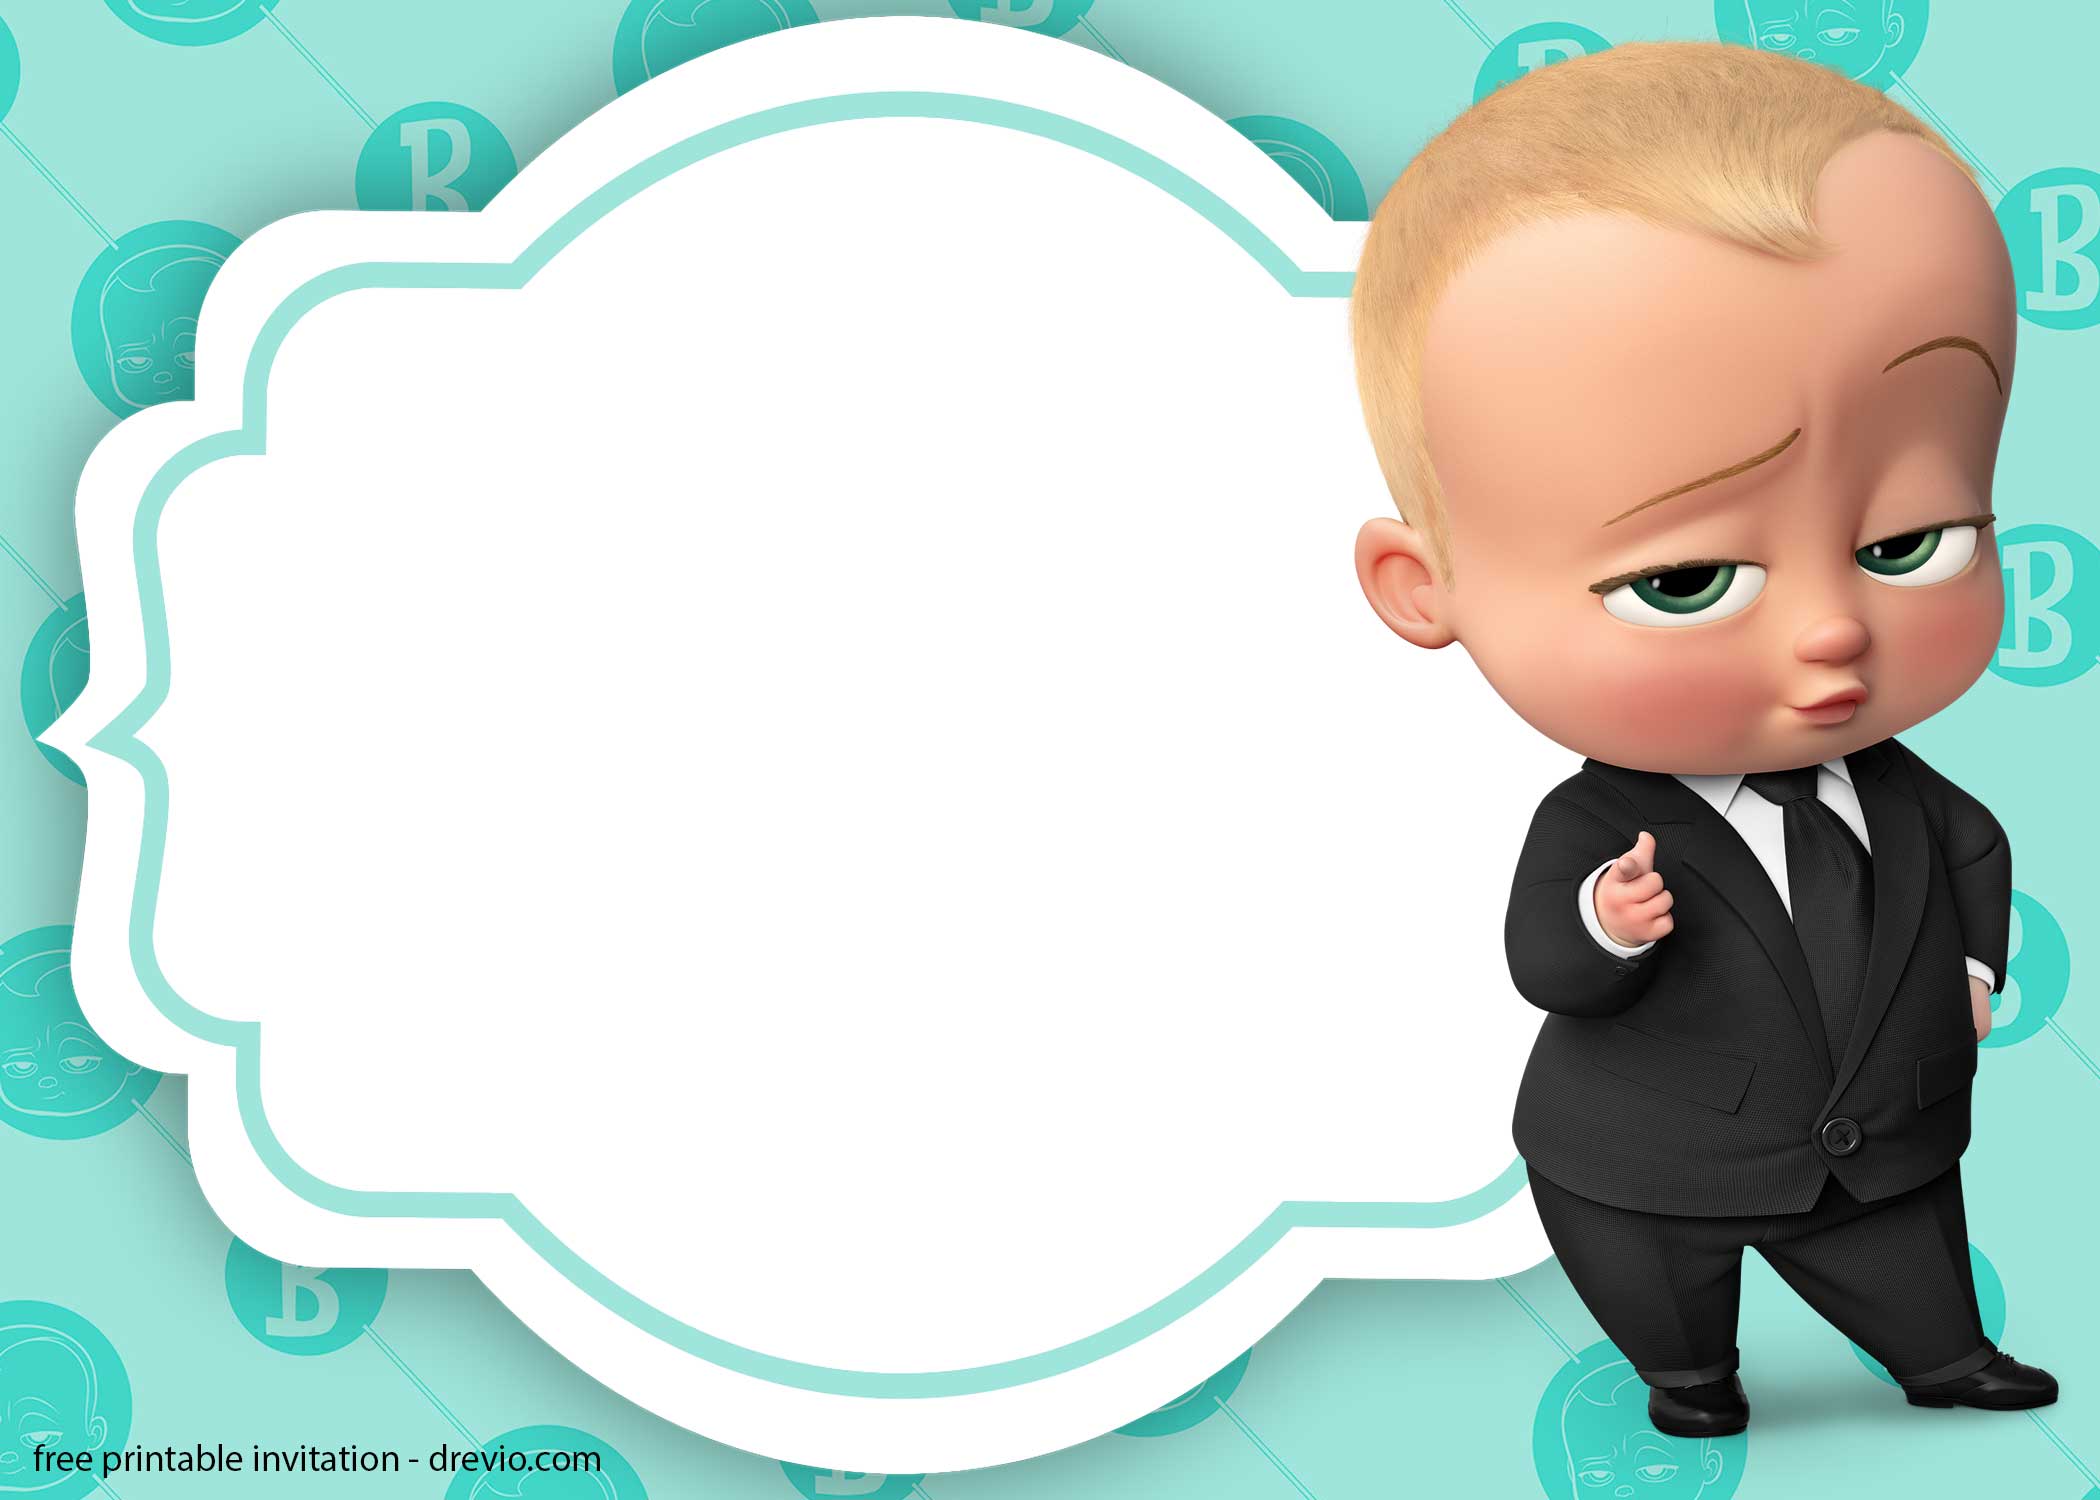 Baby Boss Invitation Template for Your Adorable Little Boss | | FREE ...